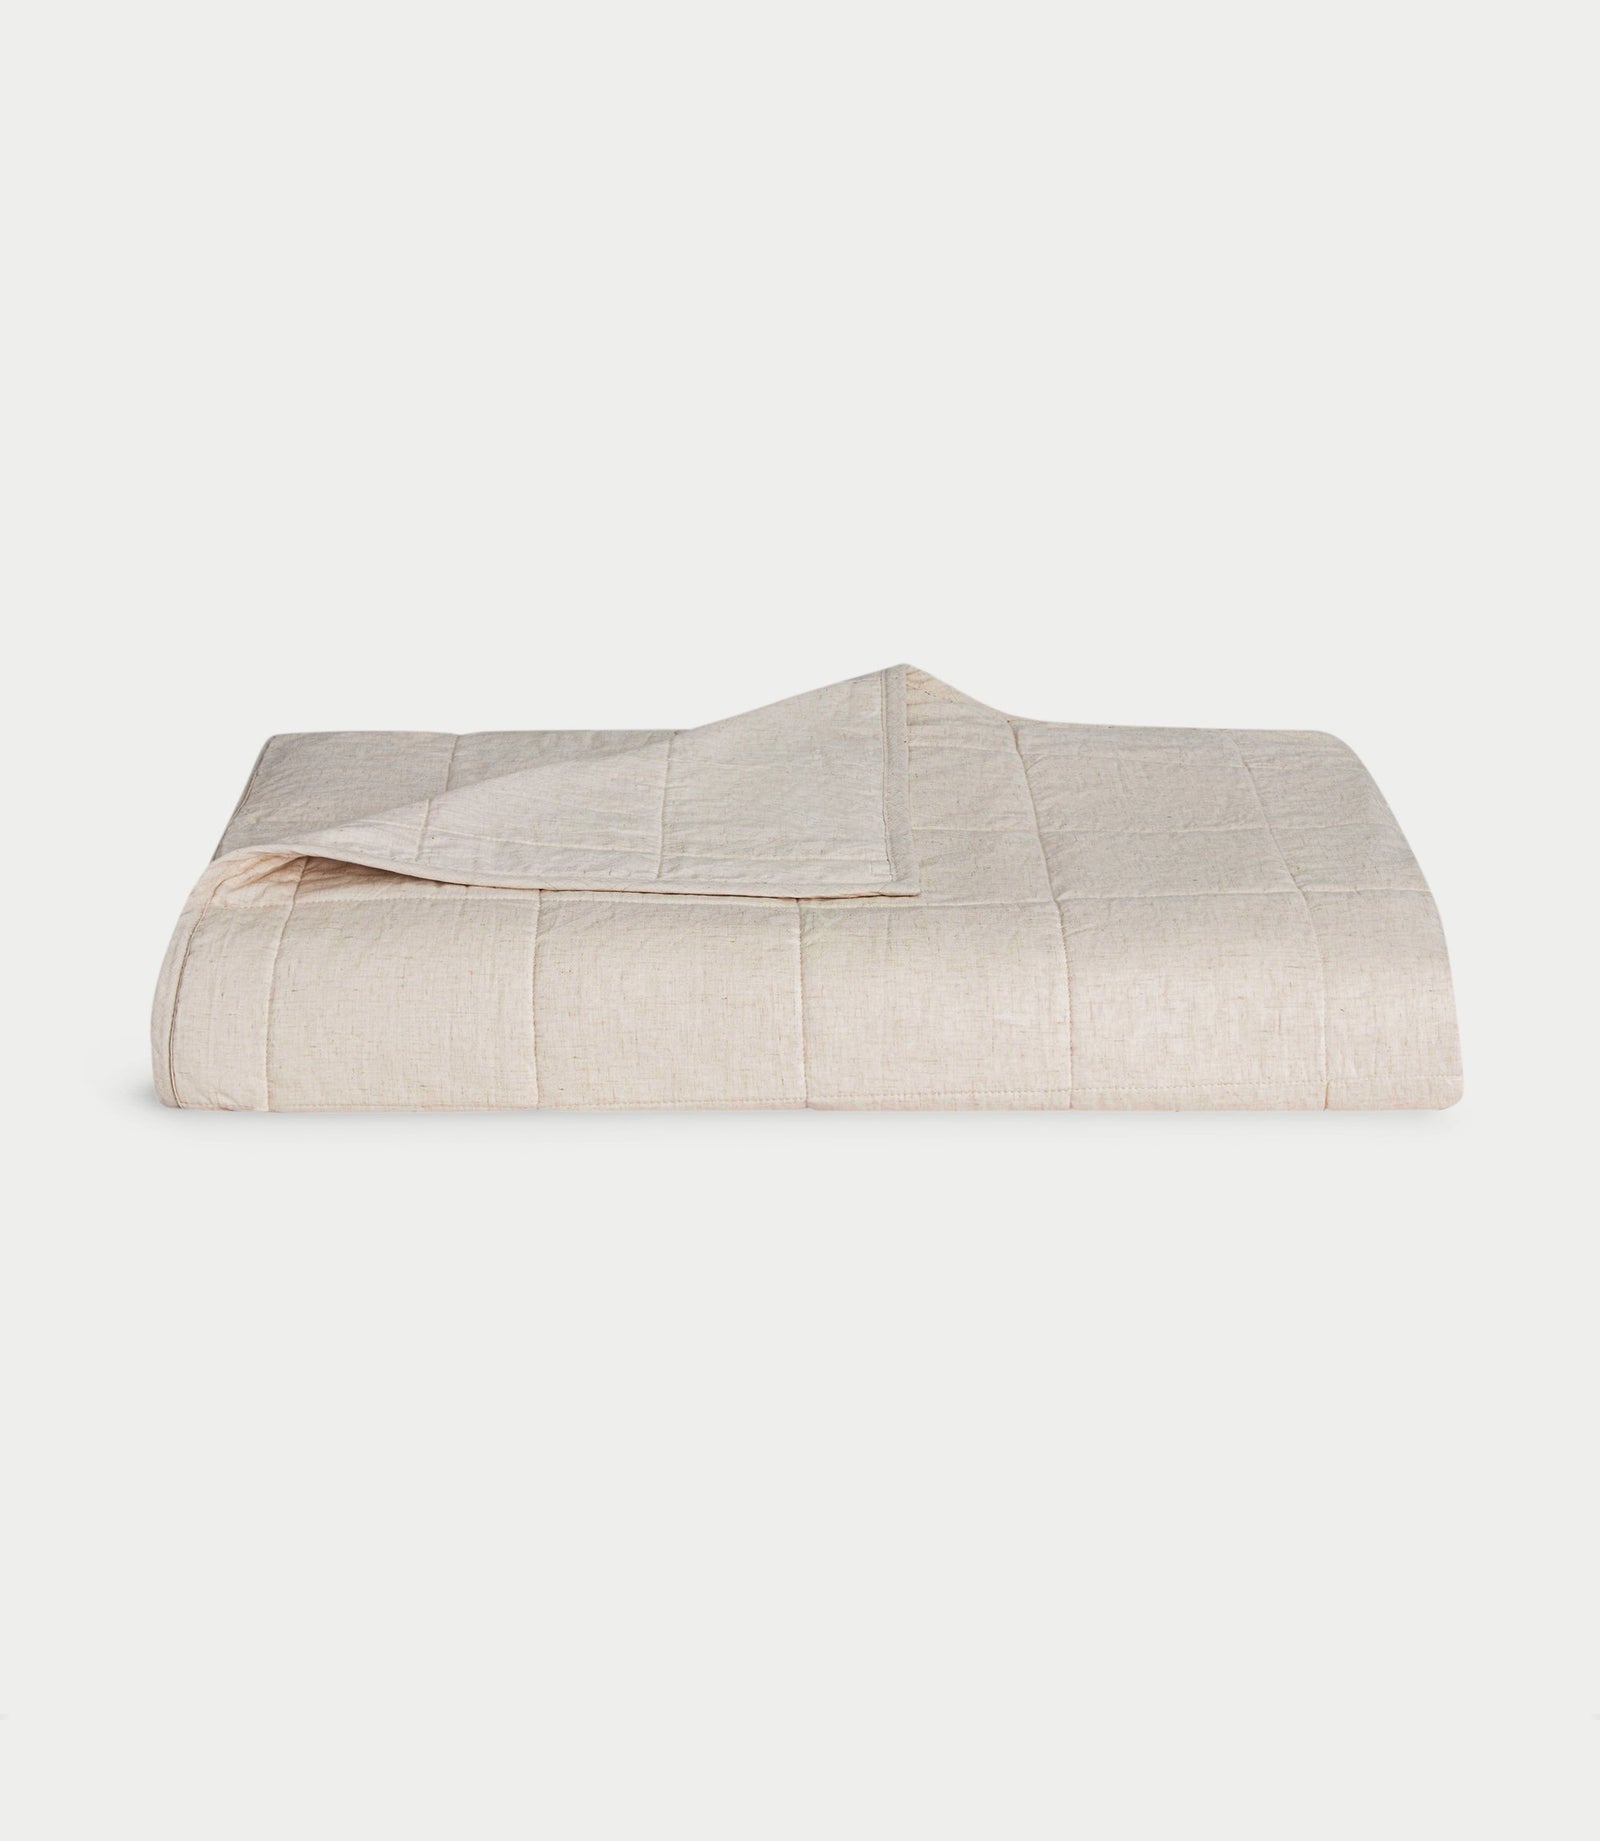 Natural  Linen Bamboo Box Quilt folded with white background.